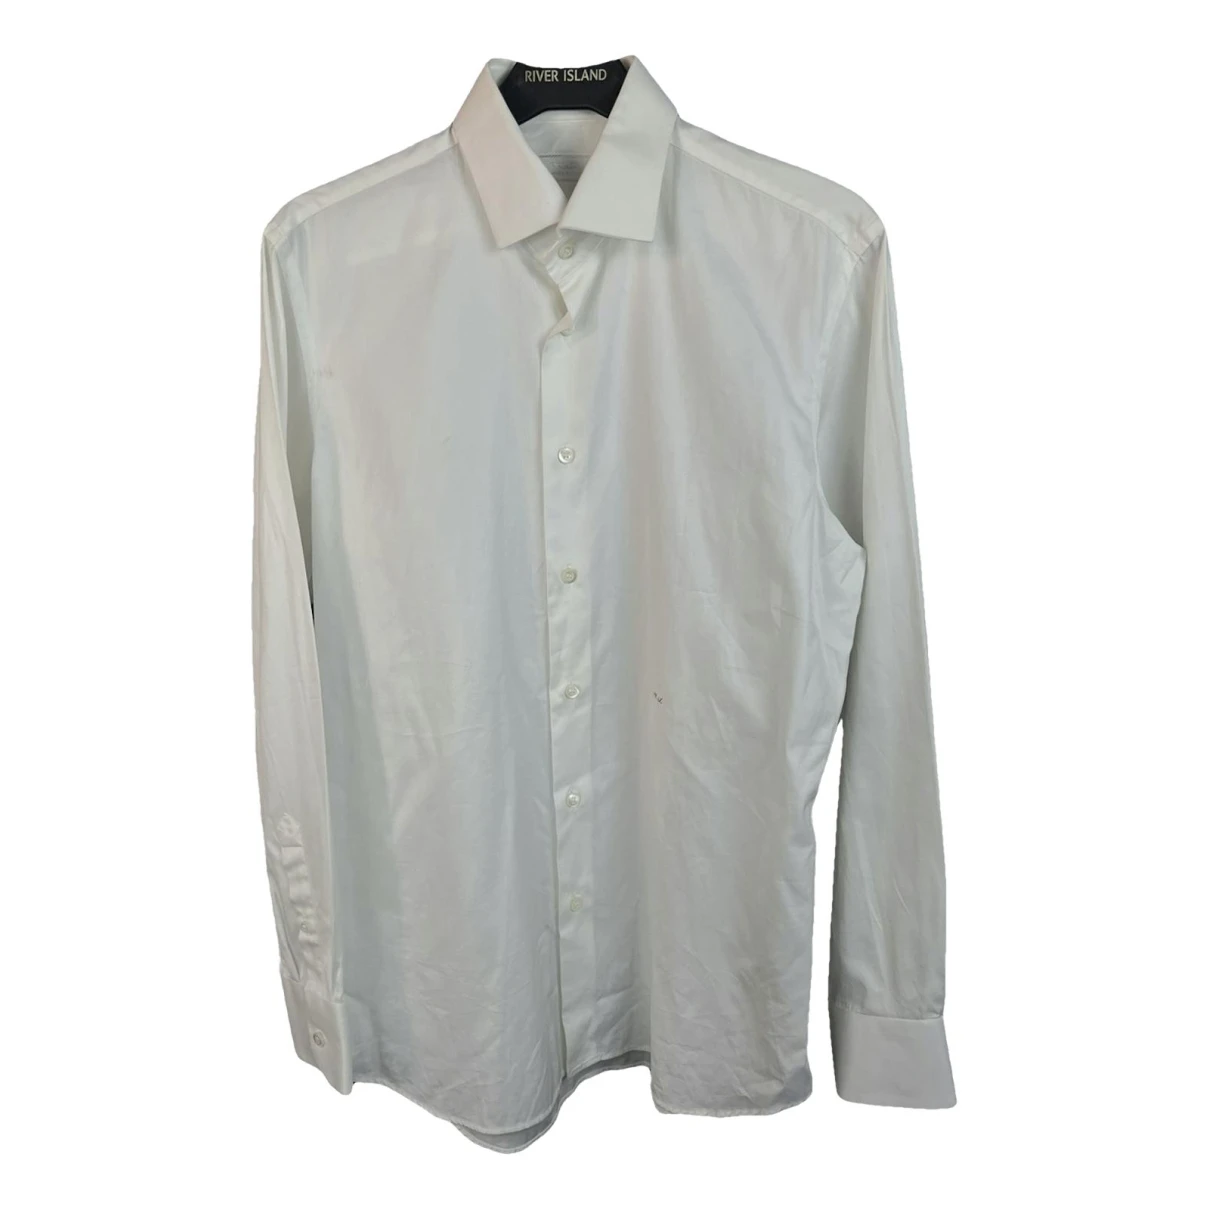 clothing Prada shirts for Male Cotton M International. Used condition